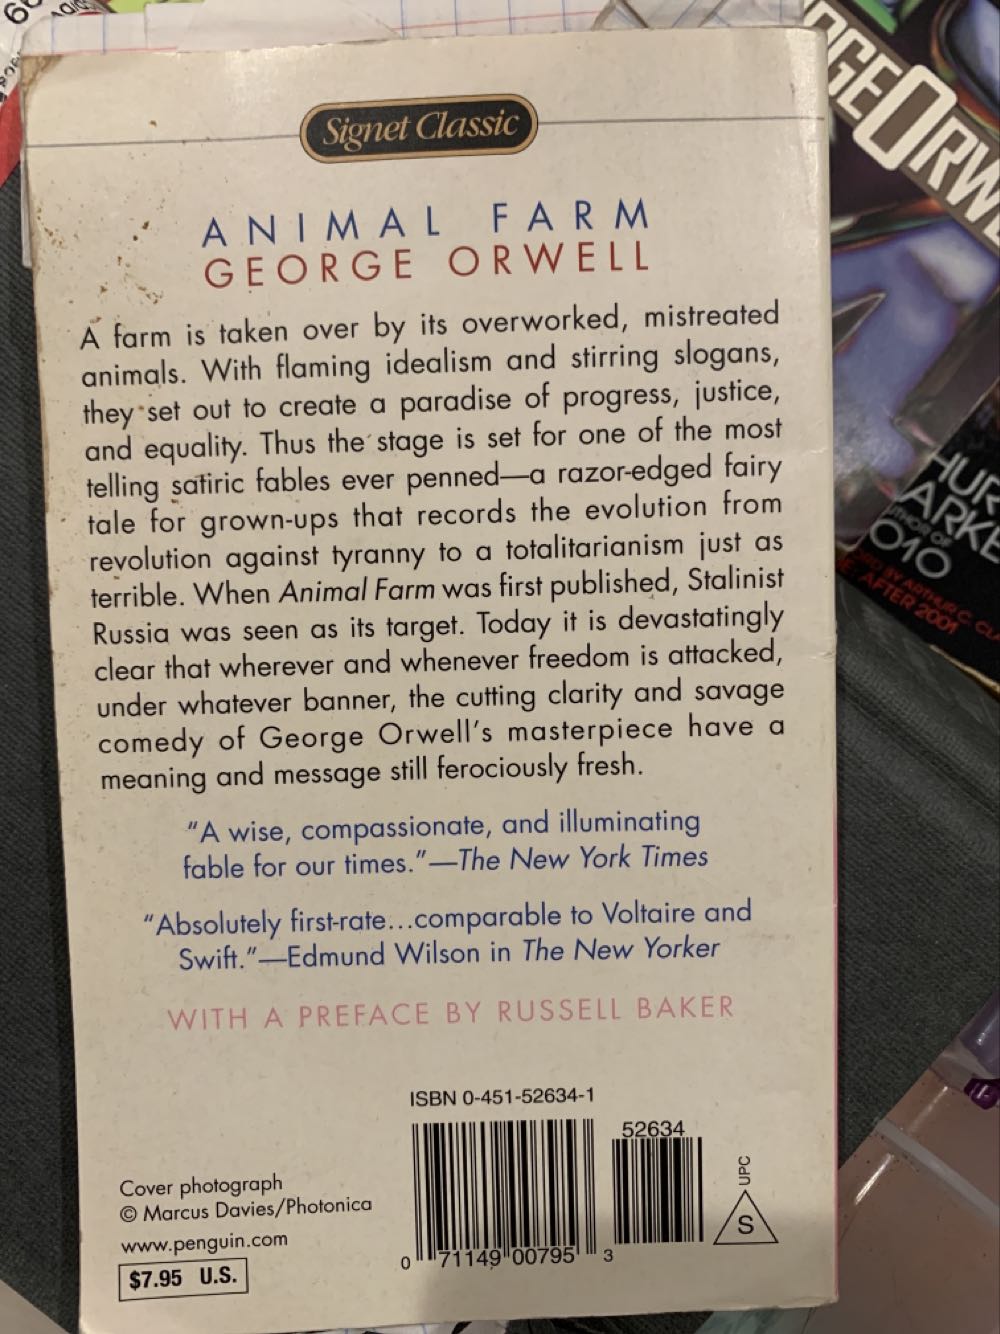 Animal Farm - George Orwell (Signet Classic - Paperback) book collectible [Barcode 9780451526342] - Main Image 3